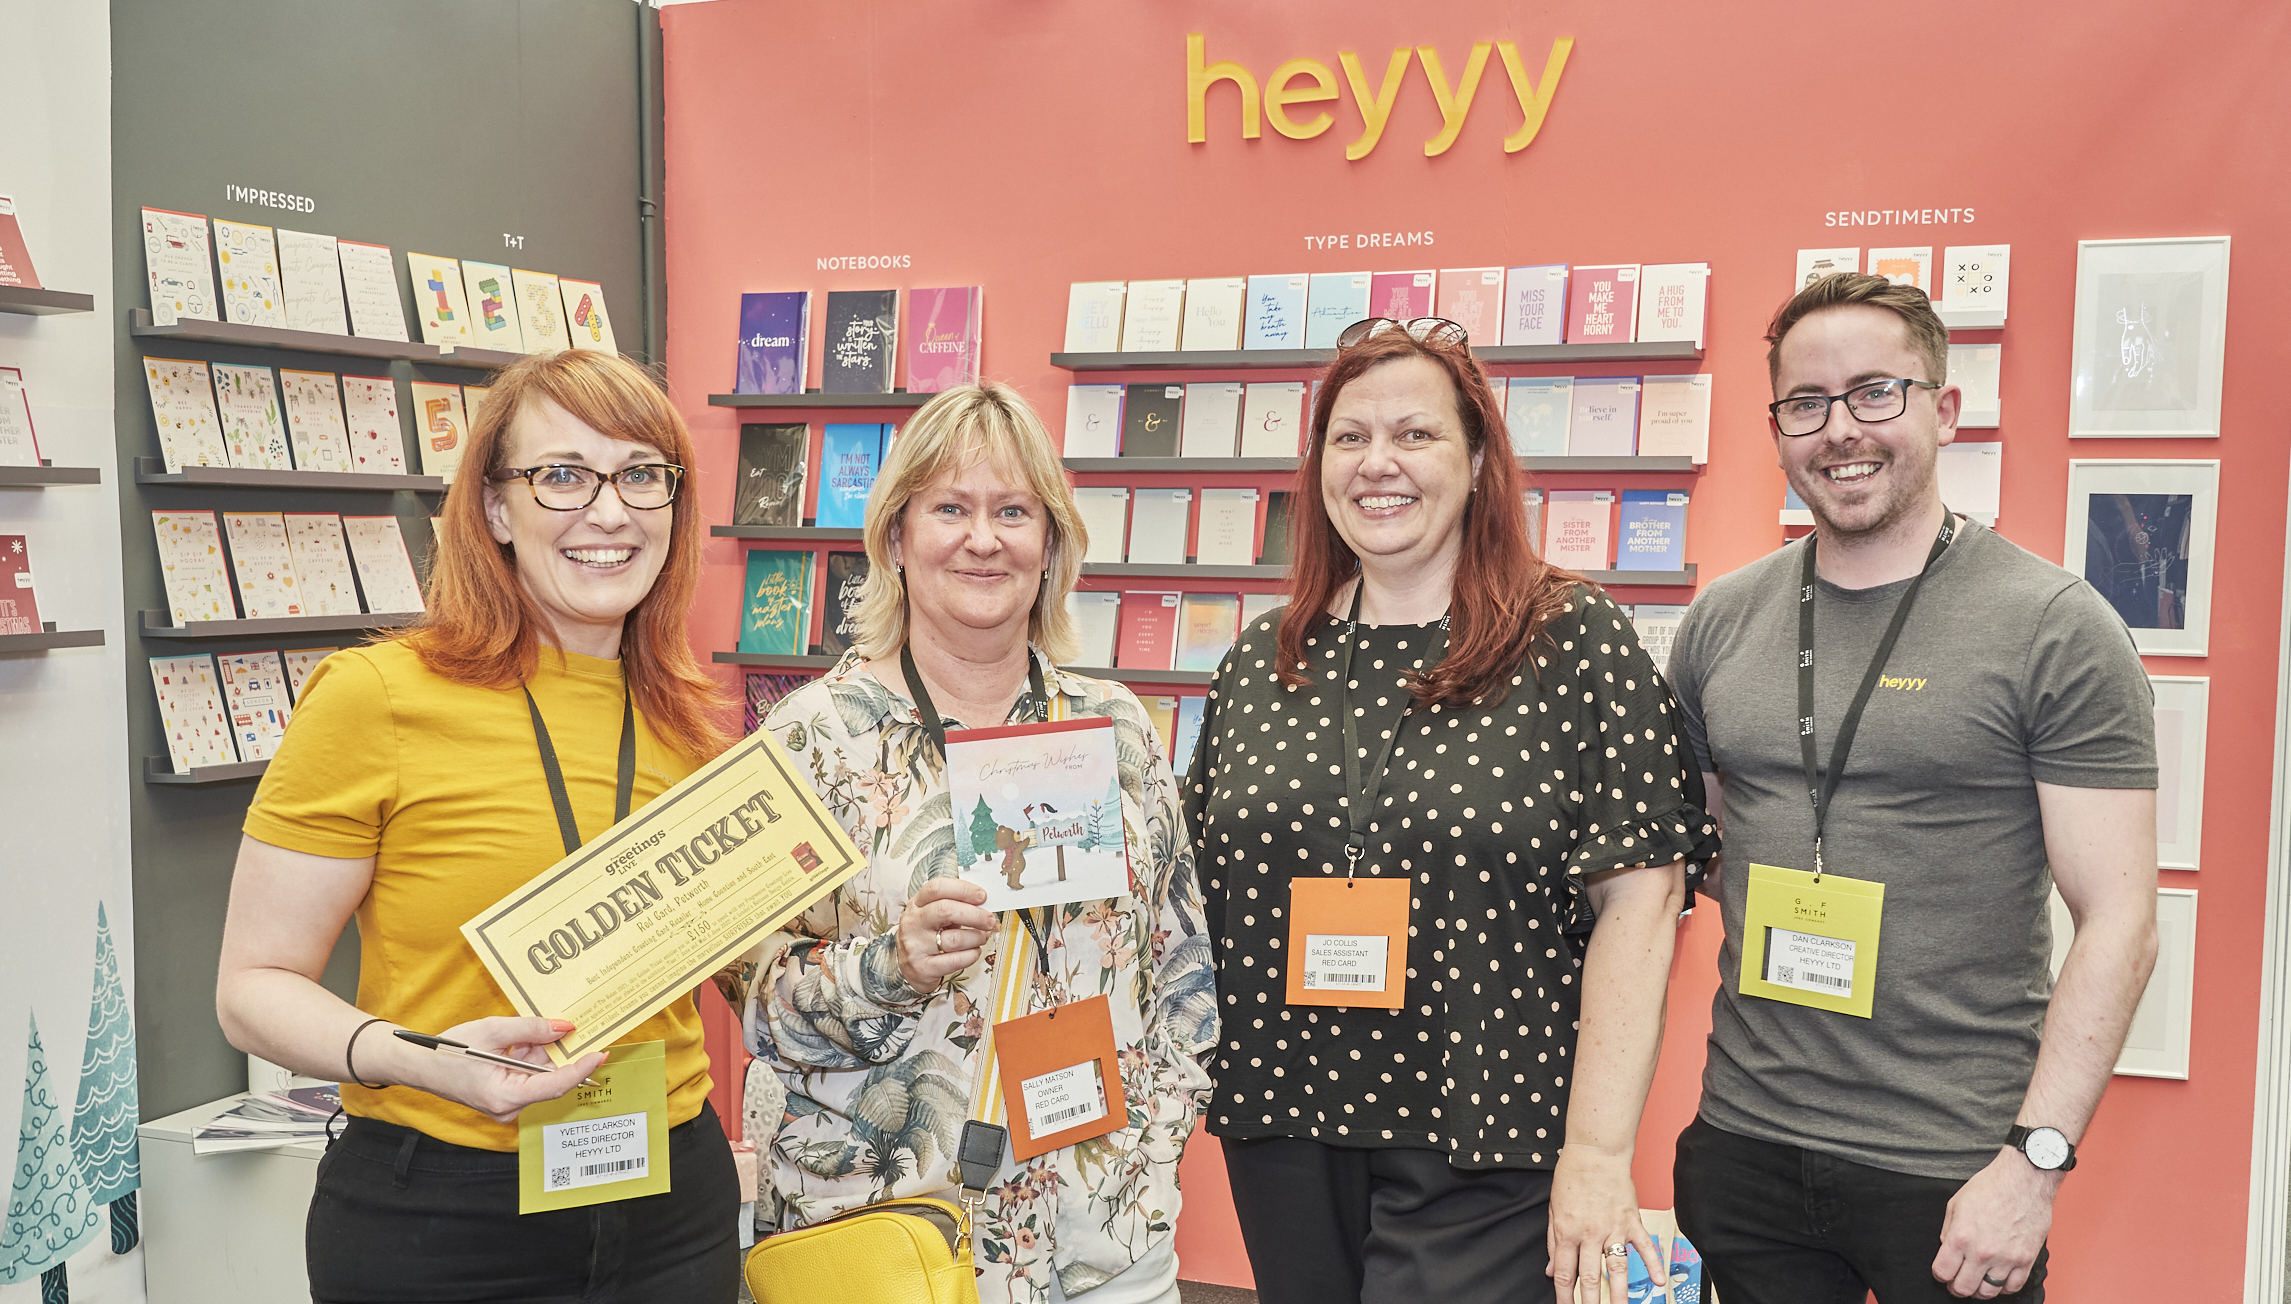 Above: Red Cards’ Sally Matson (second left) and Jo Collis (second right) with Heyyy’s Yvette and Dan Clarkson, one of her top finds